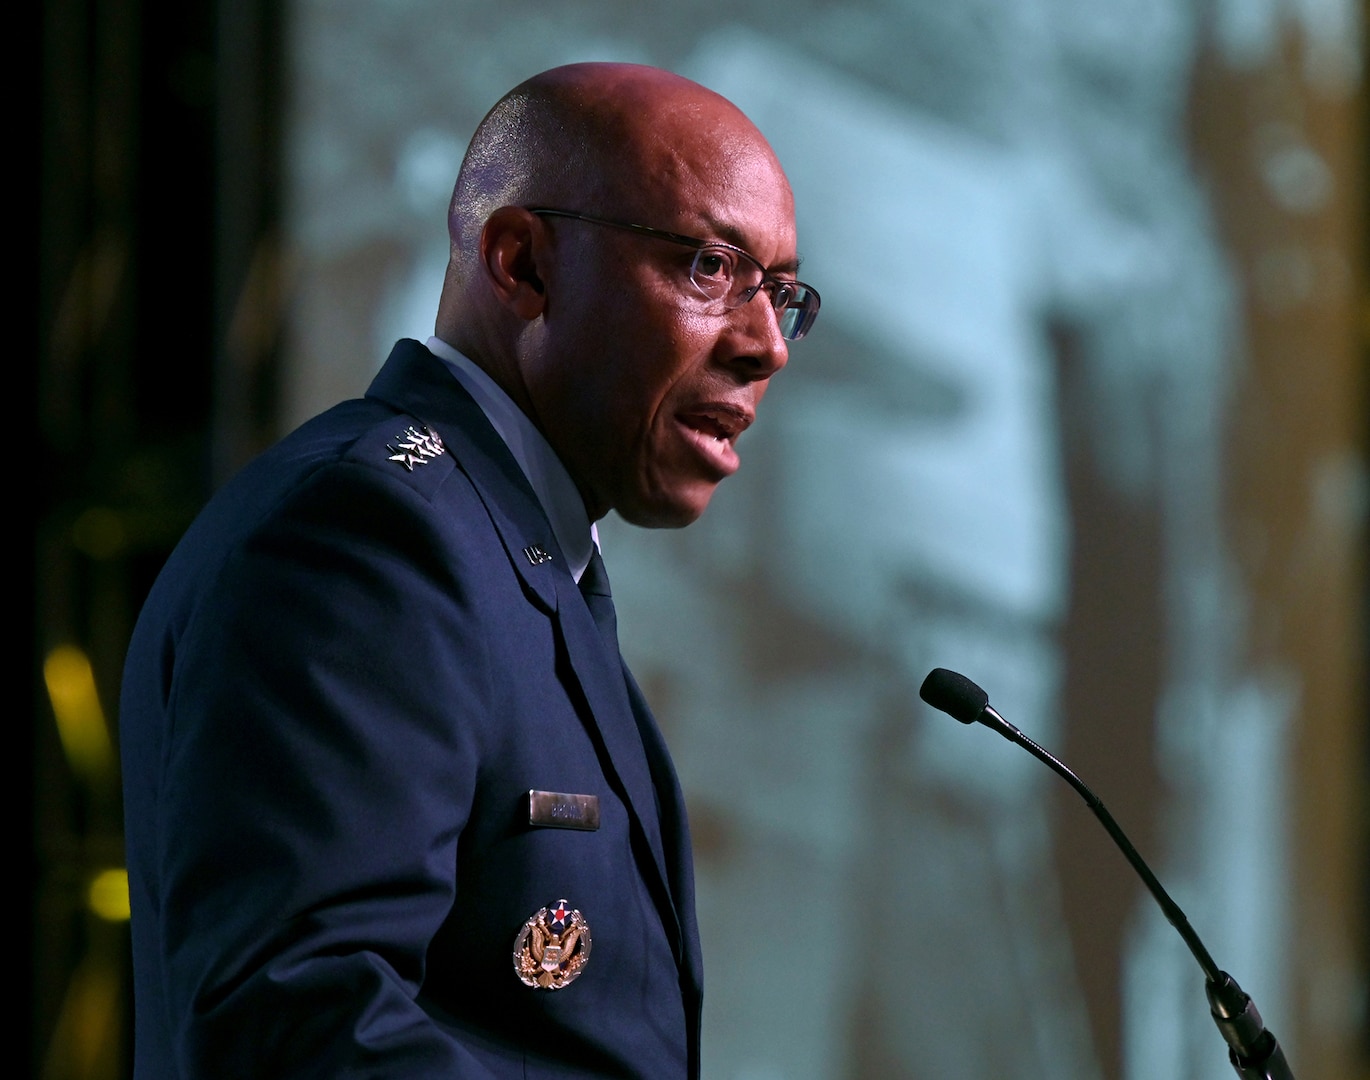 Air Force Chief of Staff Gen. CQ Brown, Jr. delivers a keynote address at the Air and Space Forces Association’s Air, Space and Cyber Conference in National Harbor, Md., Sept 12, 2023. (U.S. Air Force photo by Andy Morataya)